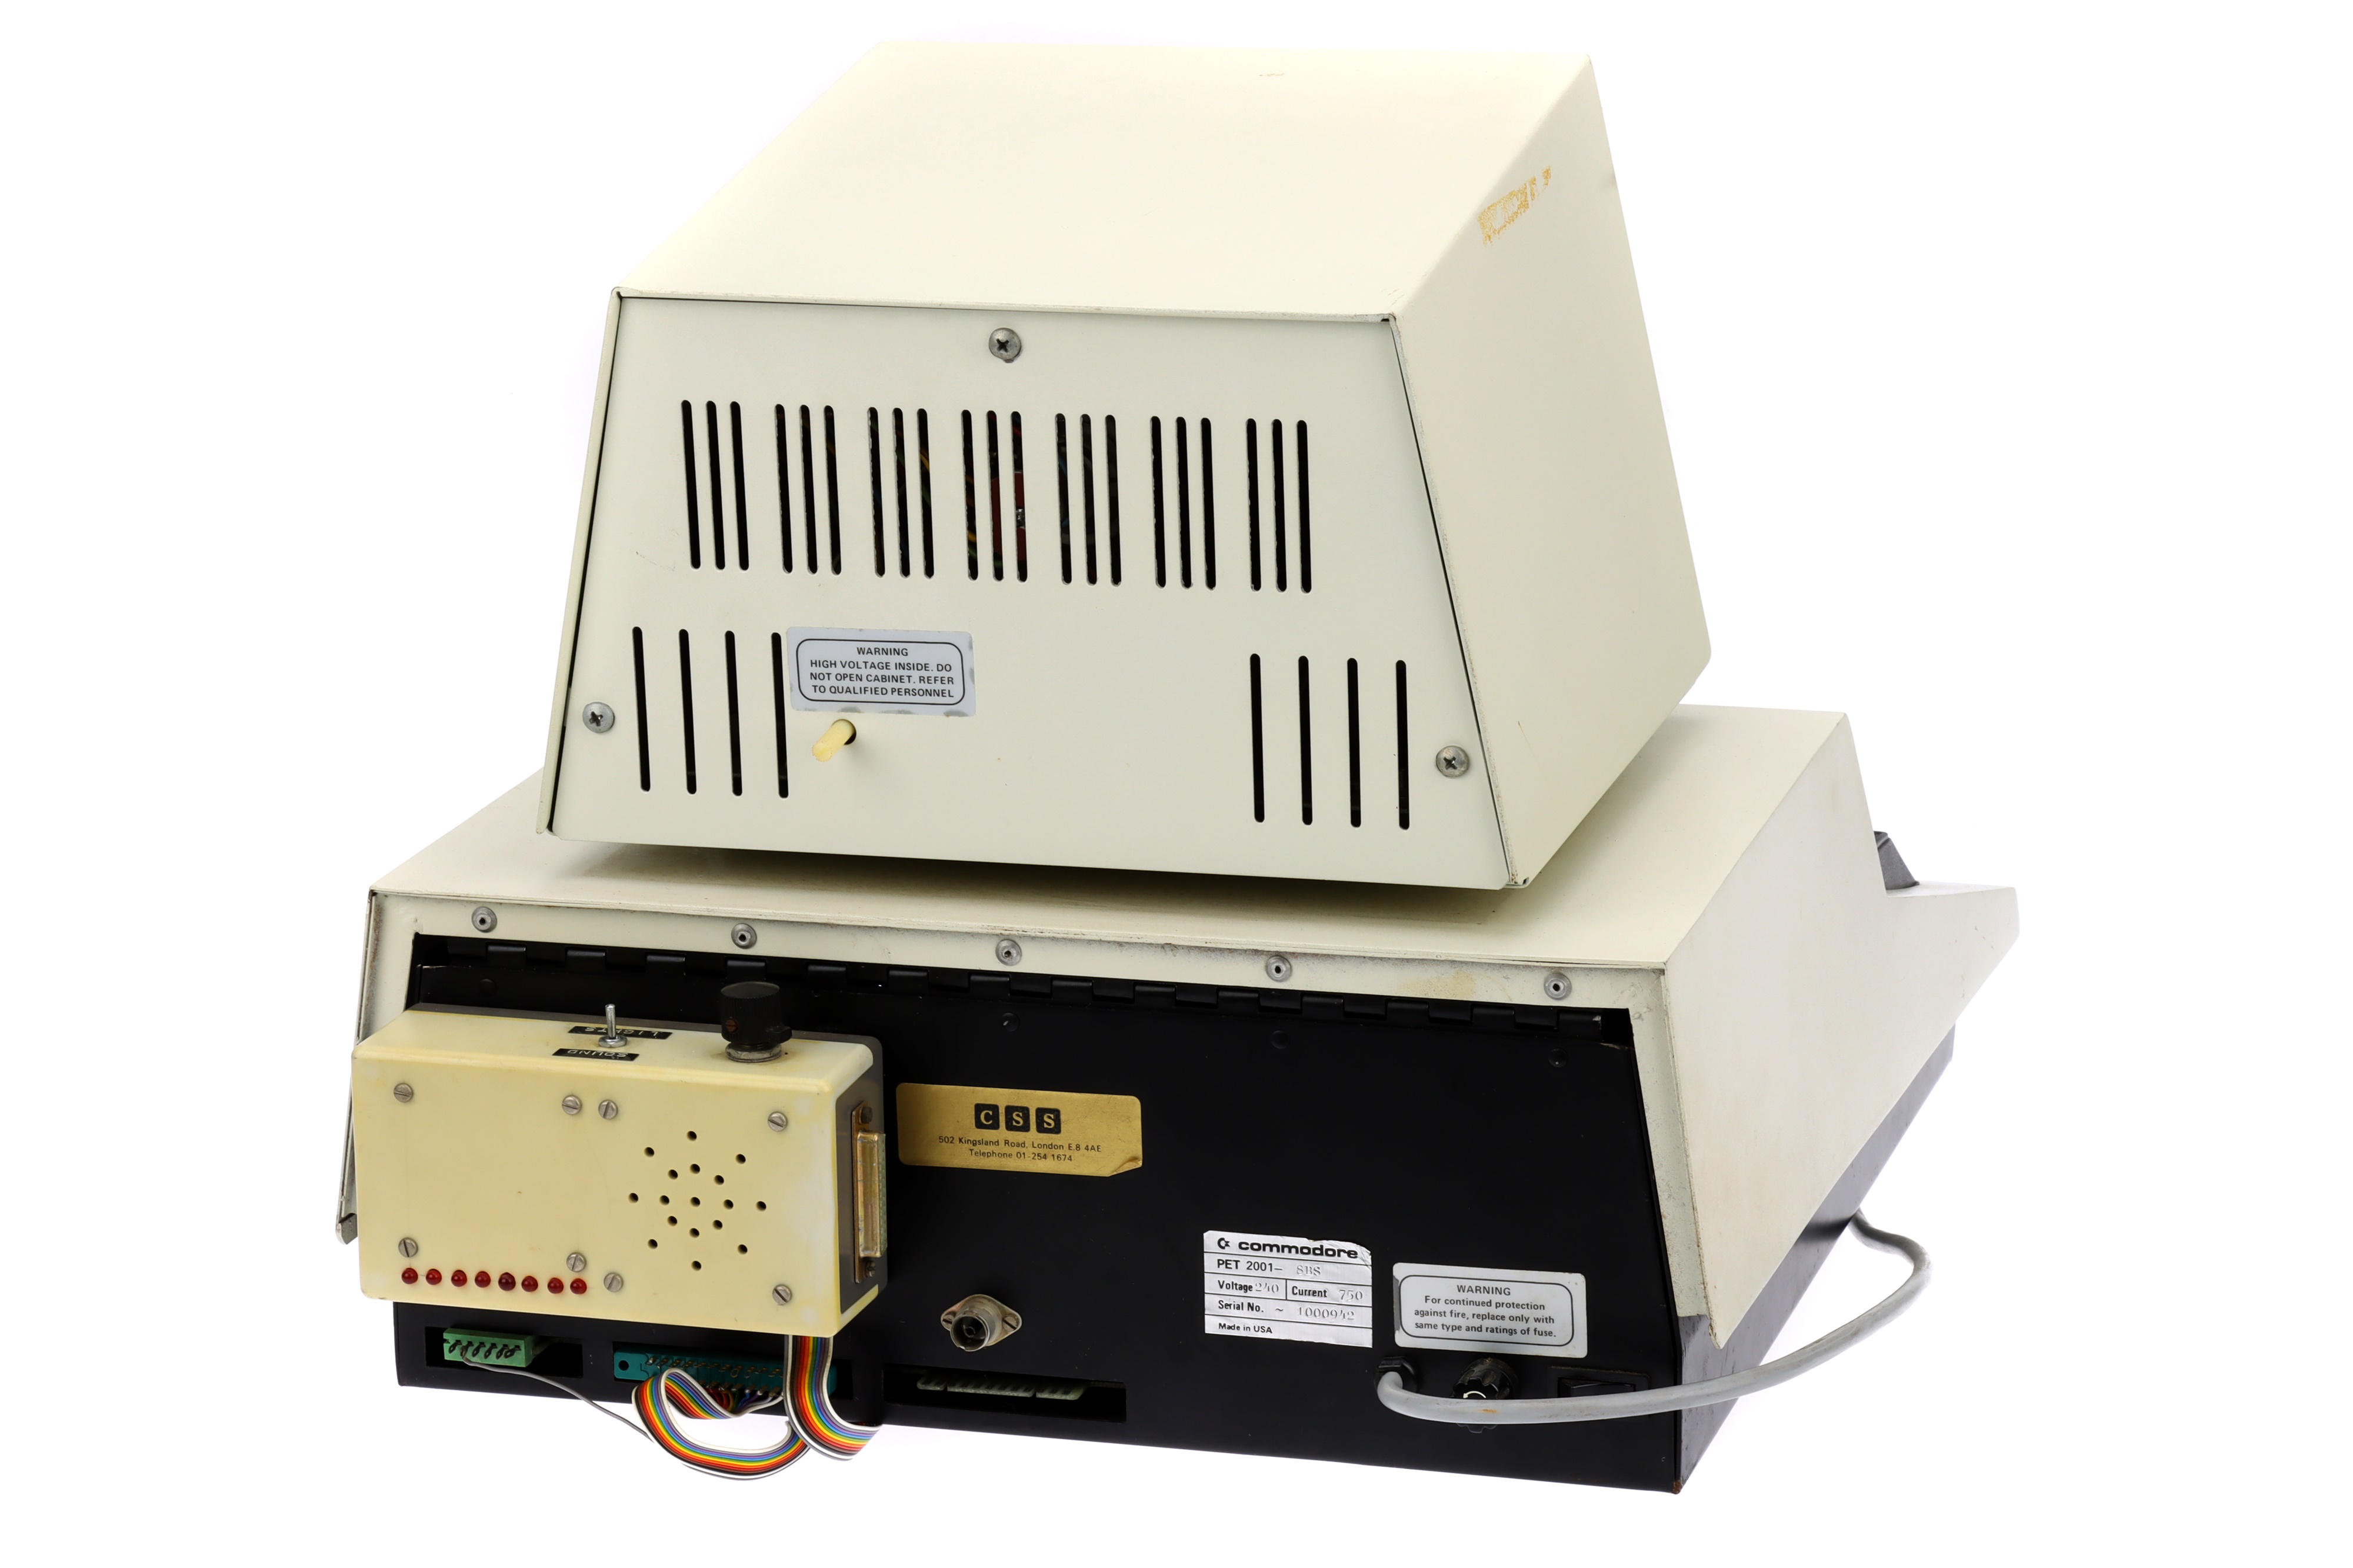 A Commodore PET 2001 Series 8BS Personal Computer, - Image 9 of 9